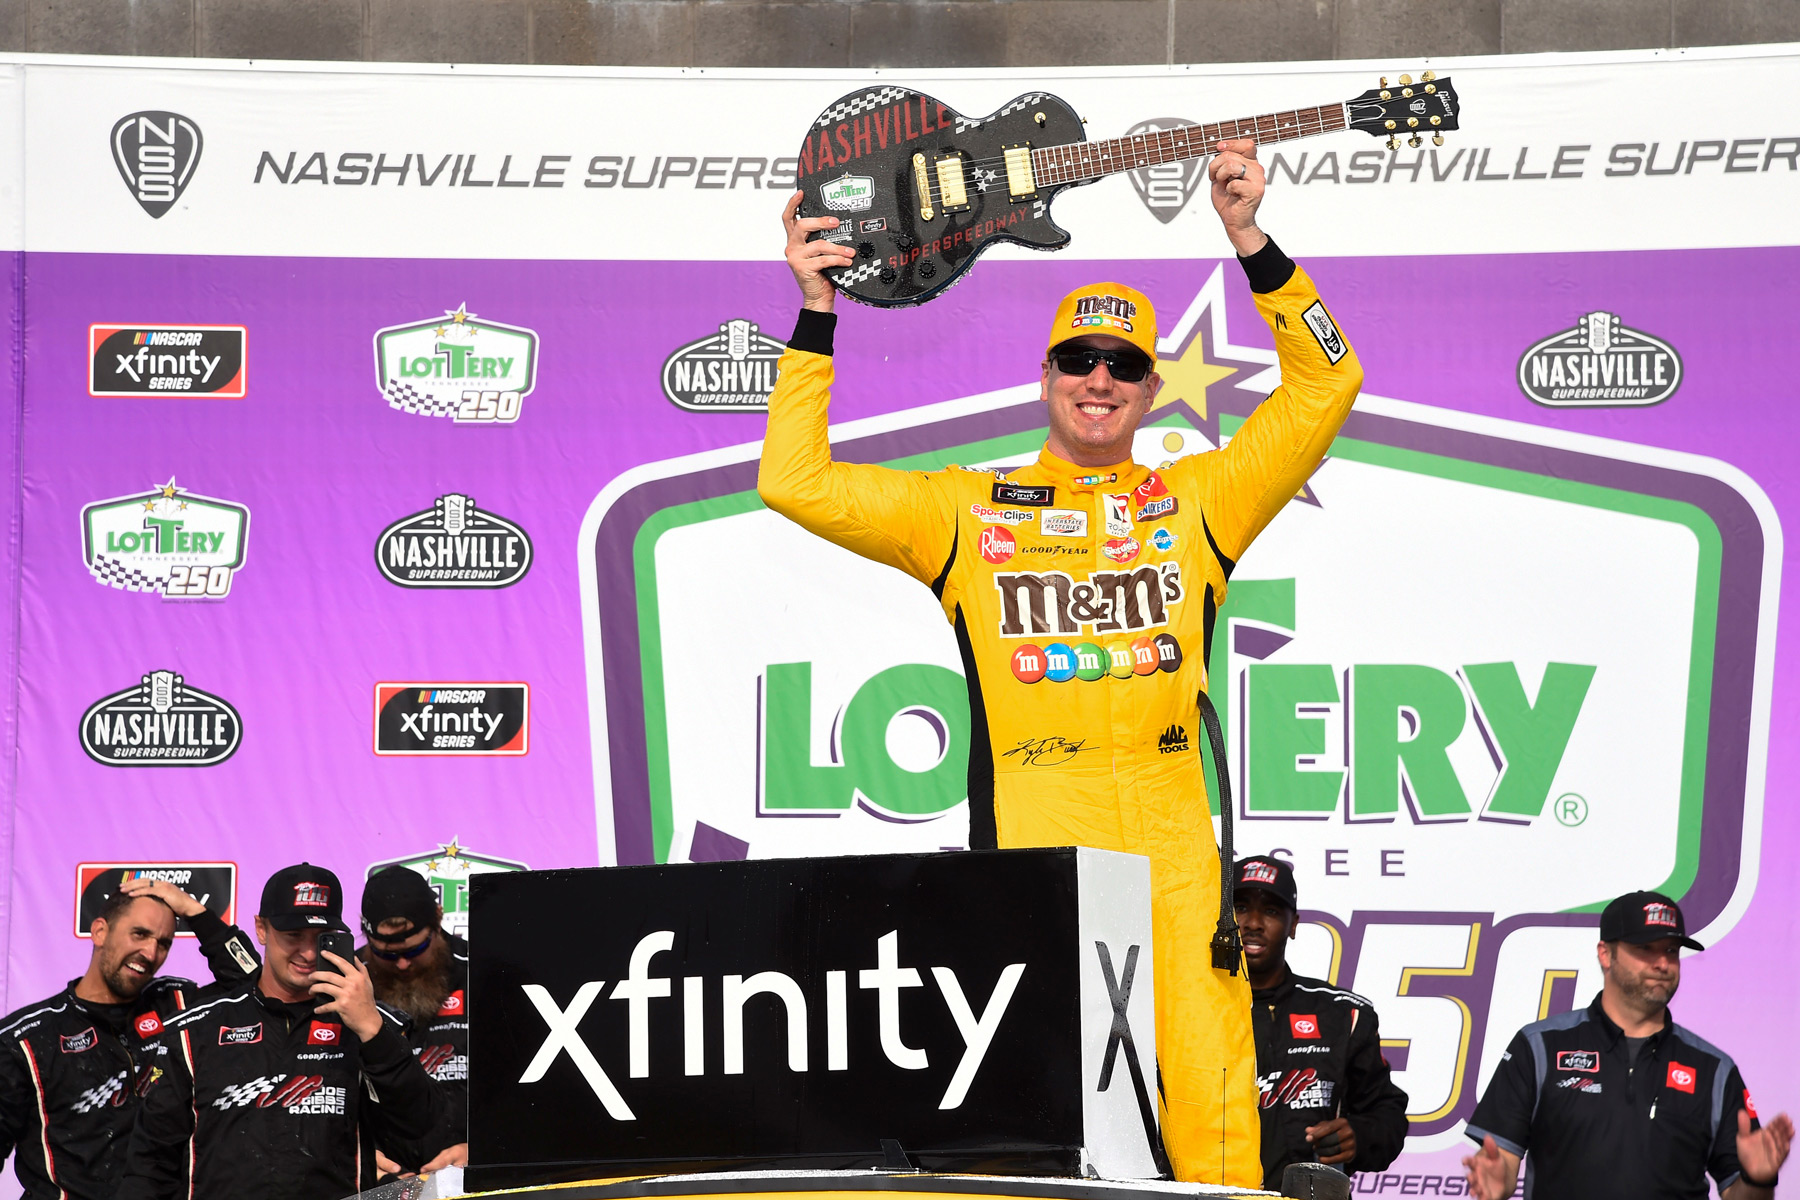 Kyle Busch earns 100th NASCAR Xfinity Series win in “Tennessee Lottery 250”